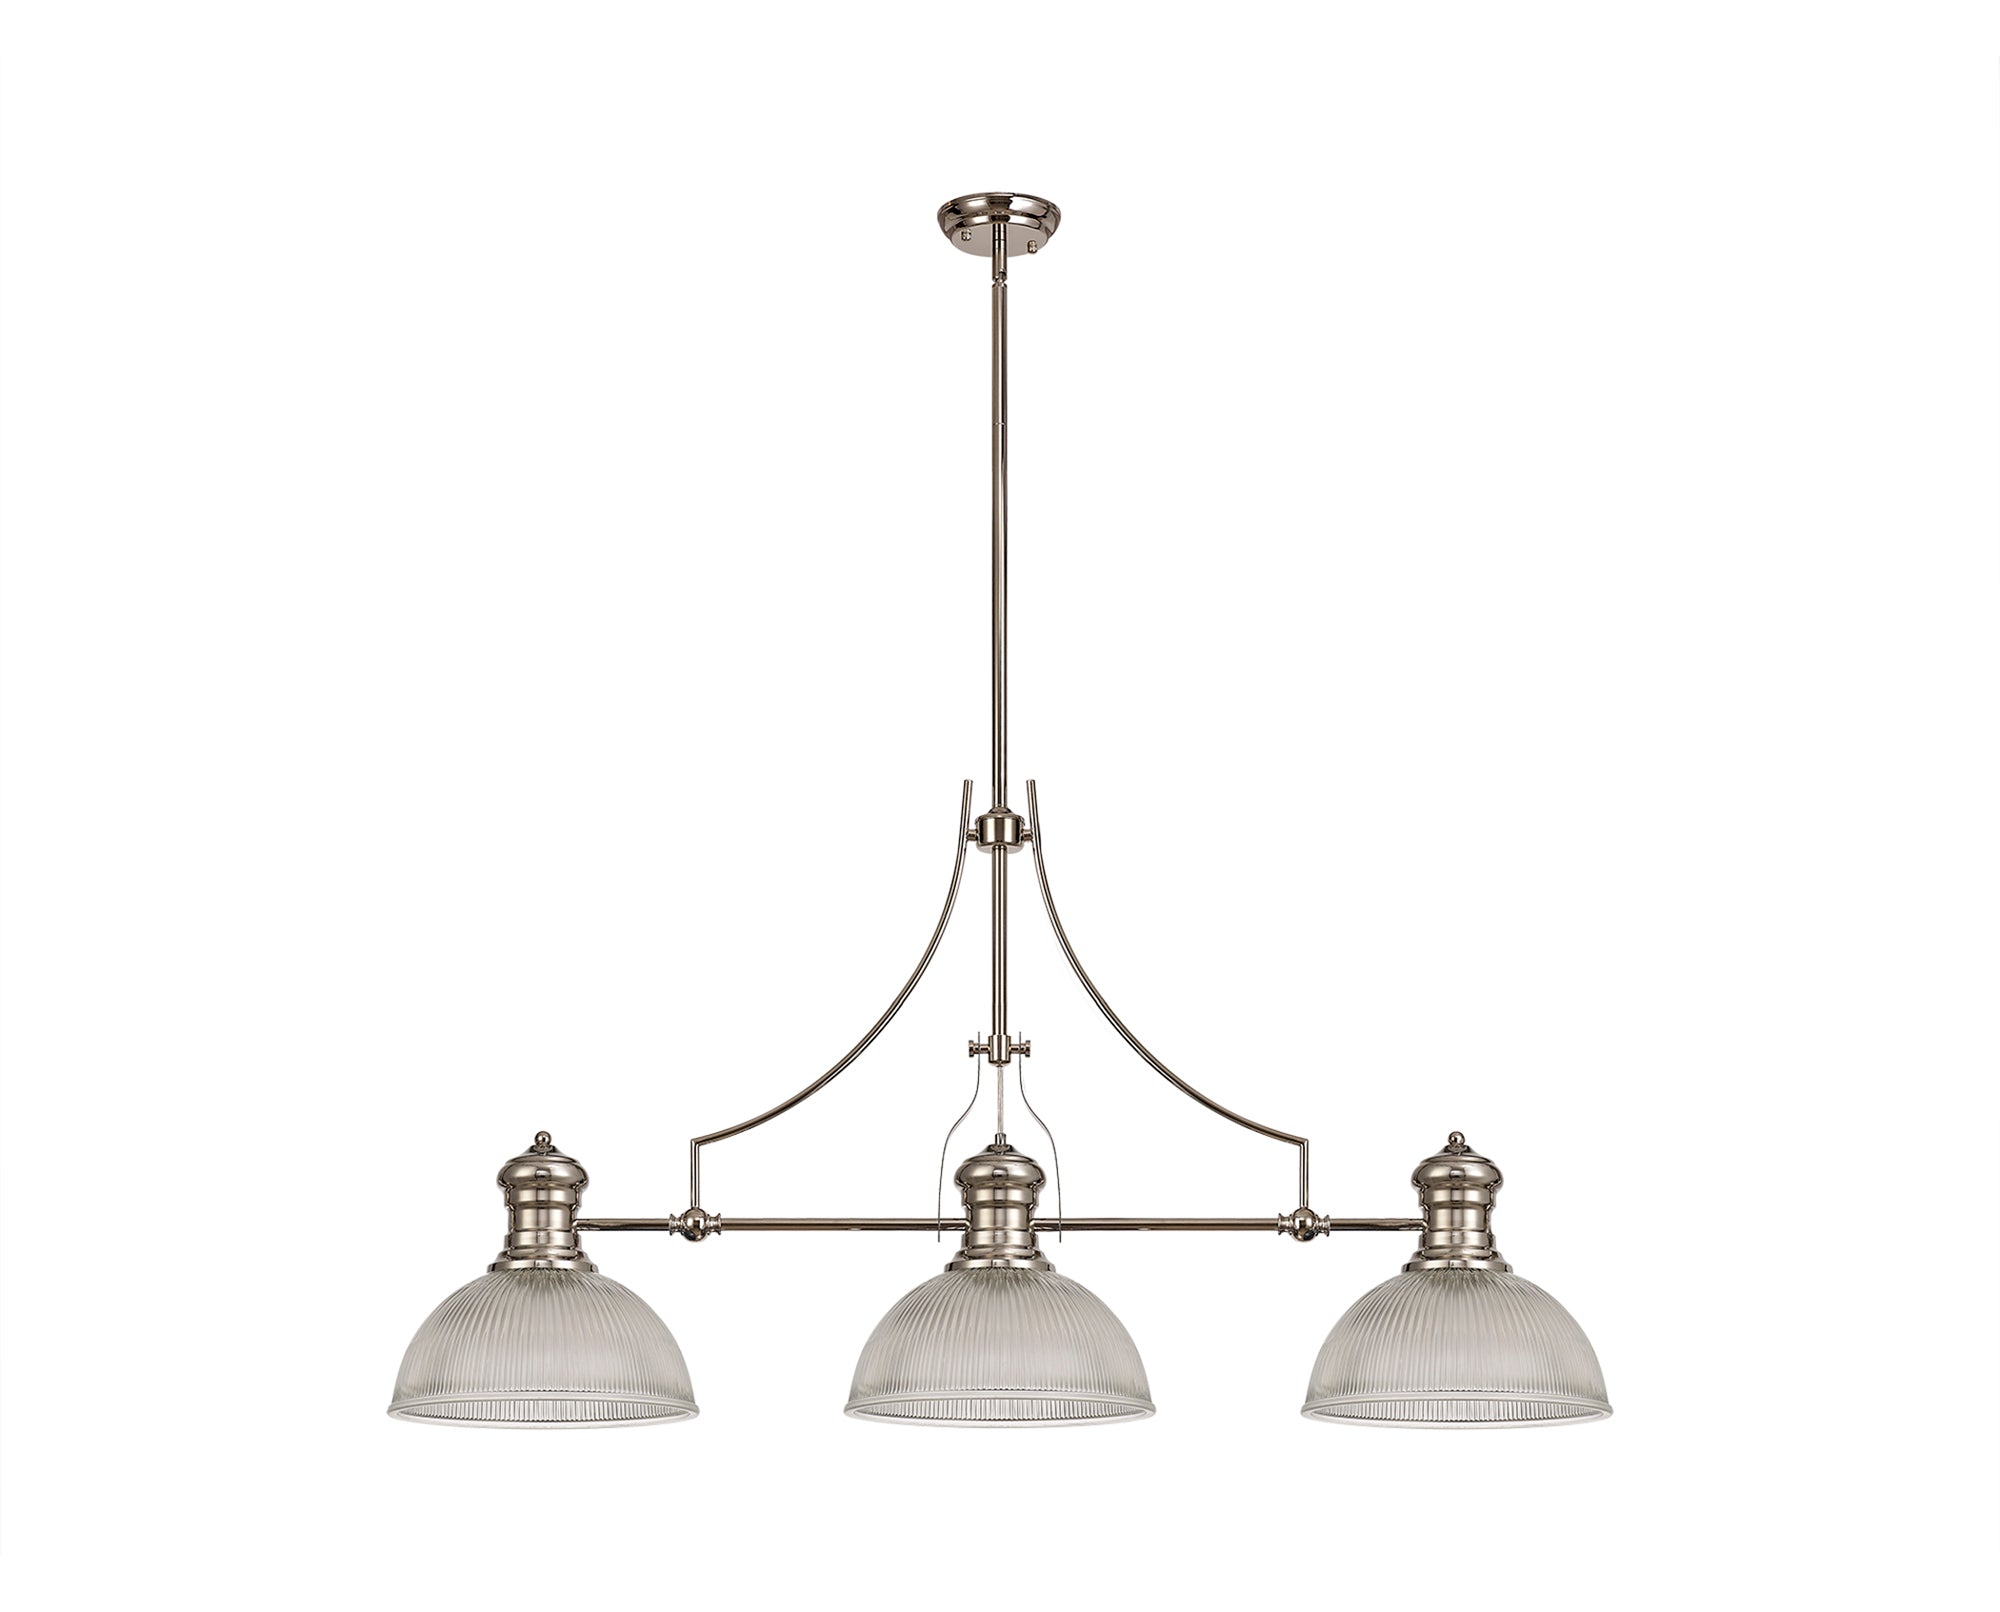 Docker 3 Light Linear Pendant E27 With 30cm Dome Glass Shade, Polished Nickel, Clear